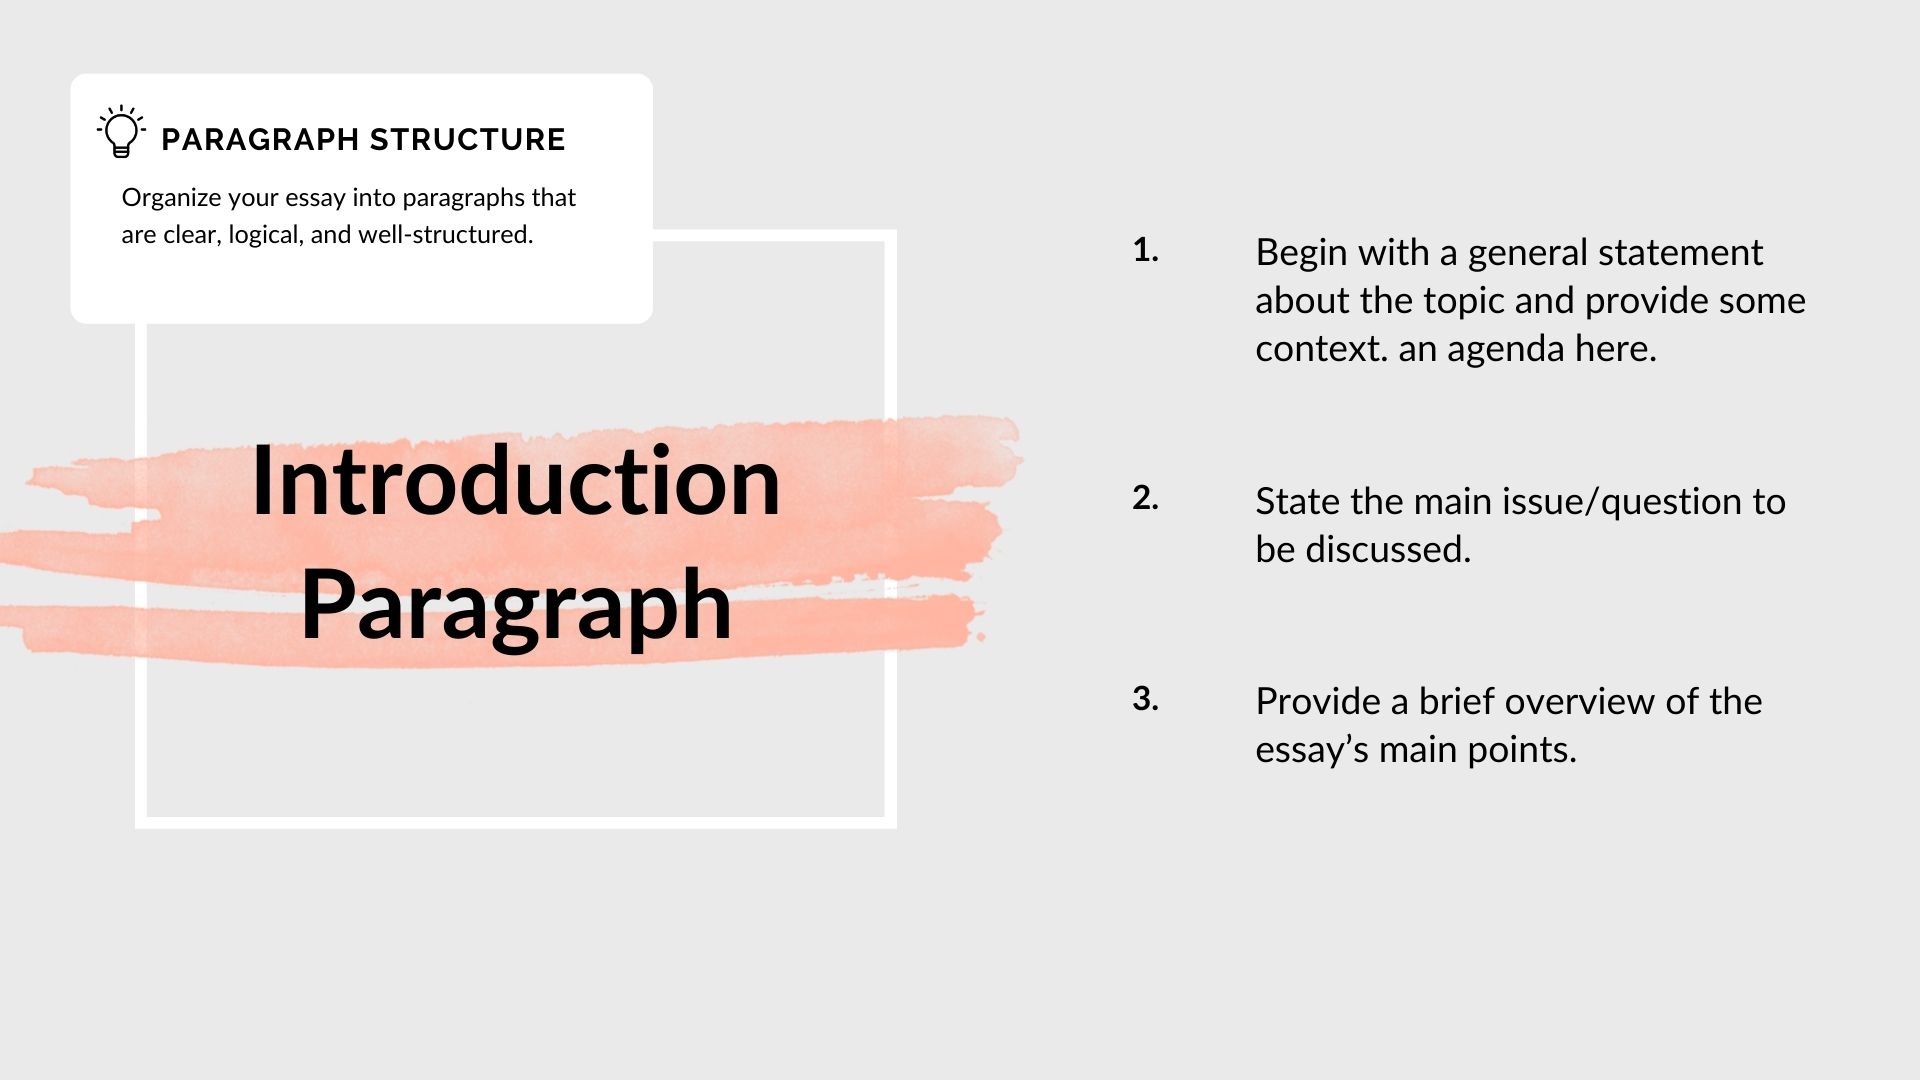 IELTS Writing task 2 - introduction paragraph structure